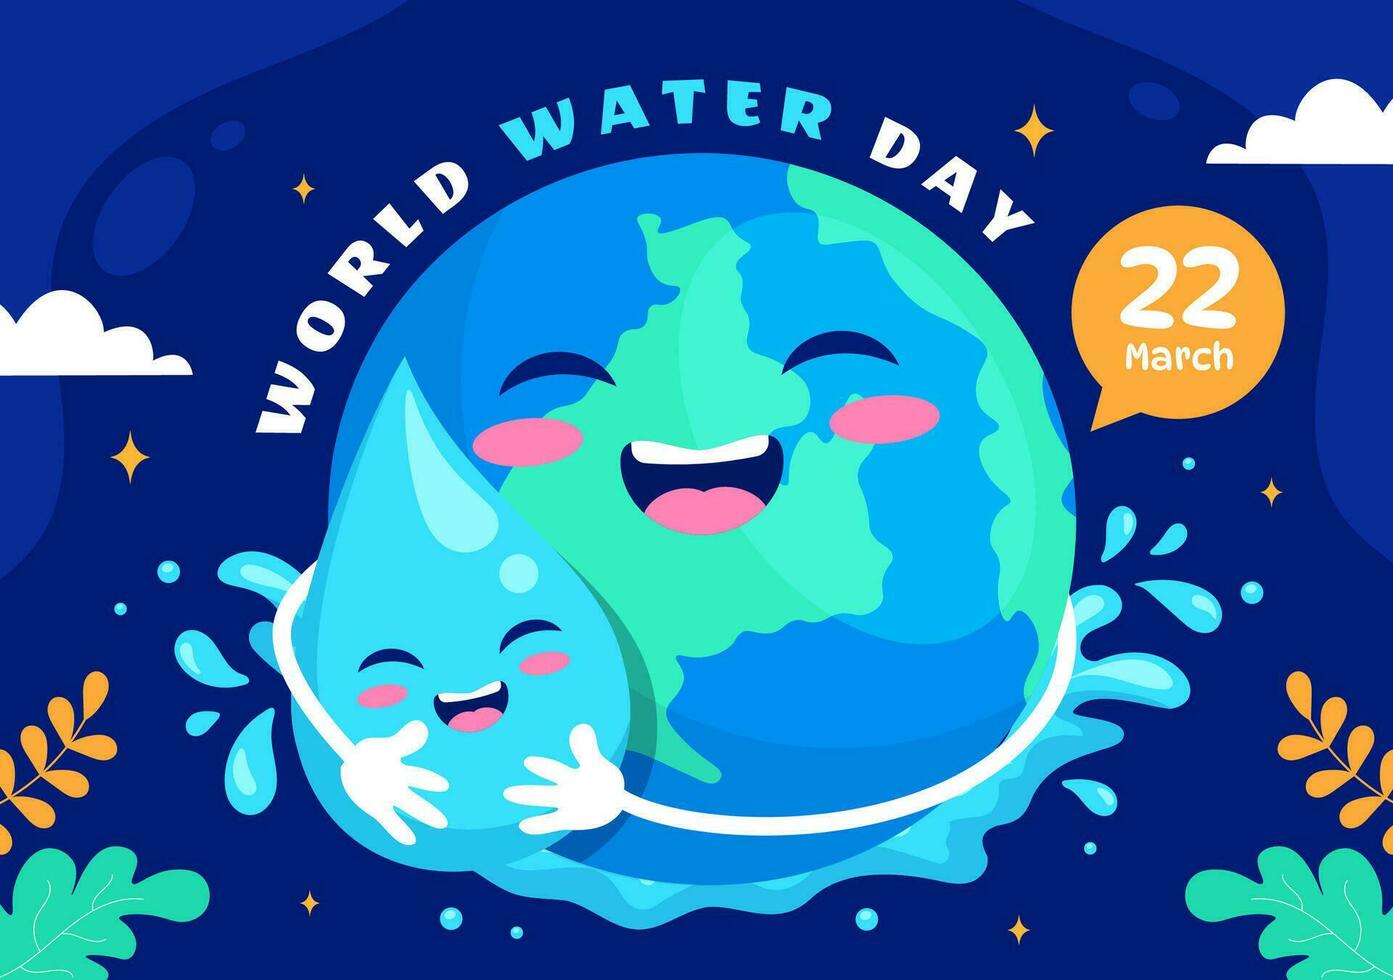 World Water Day Vector Illustration on 22 March with Waterdrop and Taps to Save Earth and Management of Freshwater in Background Design